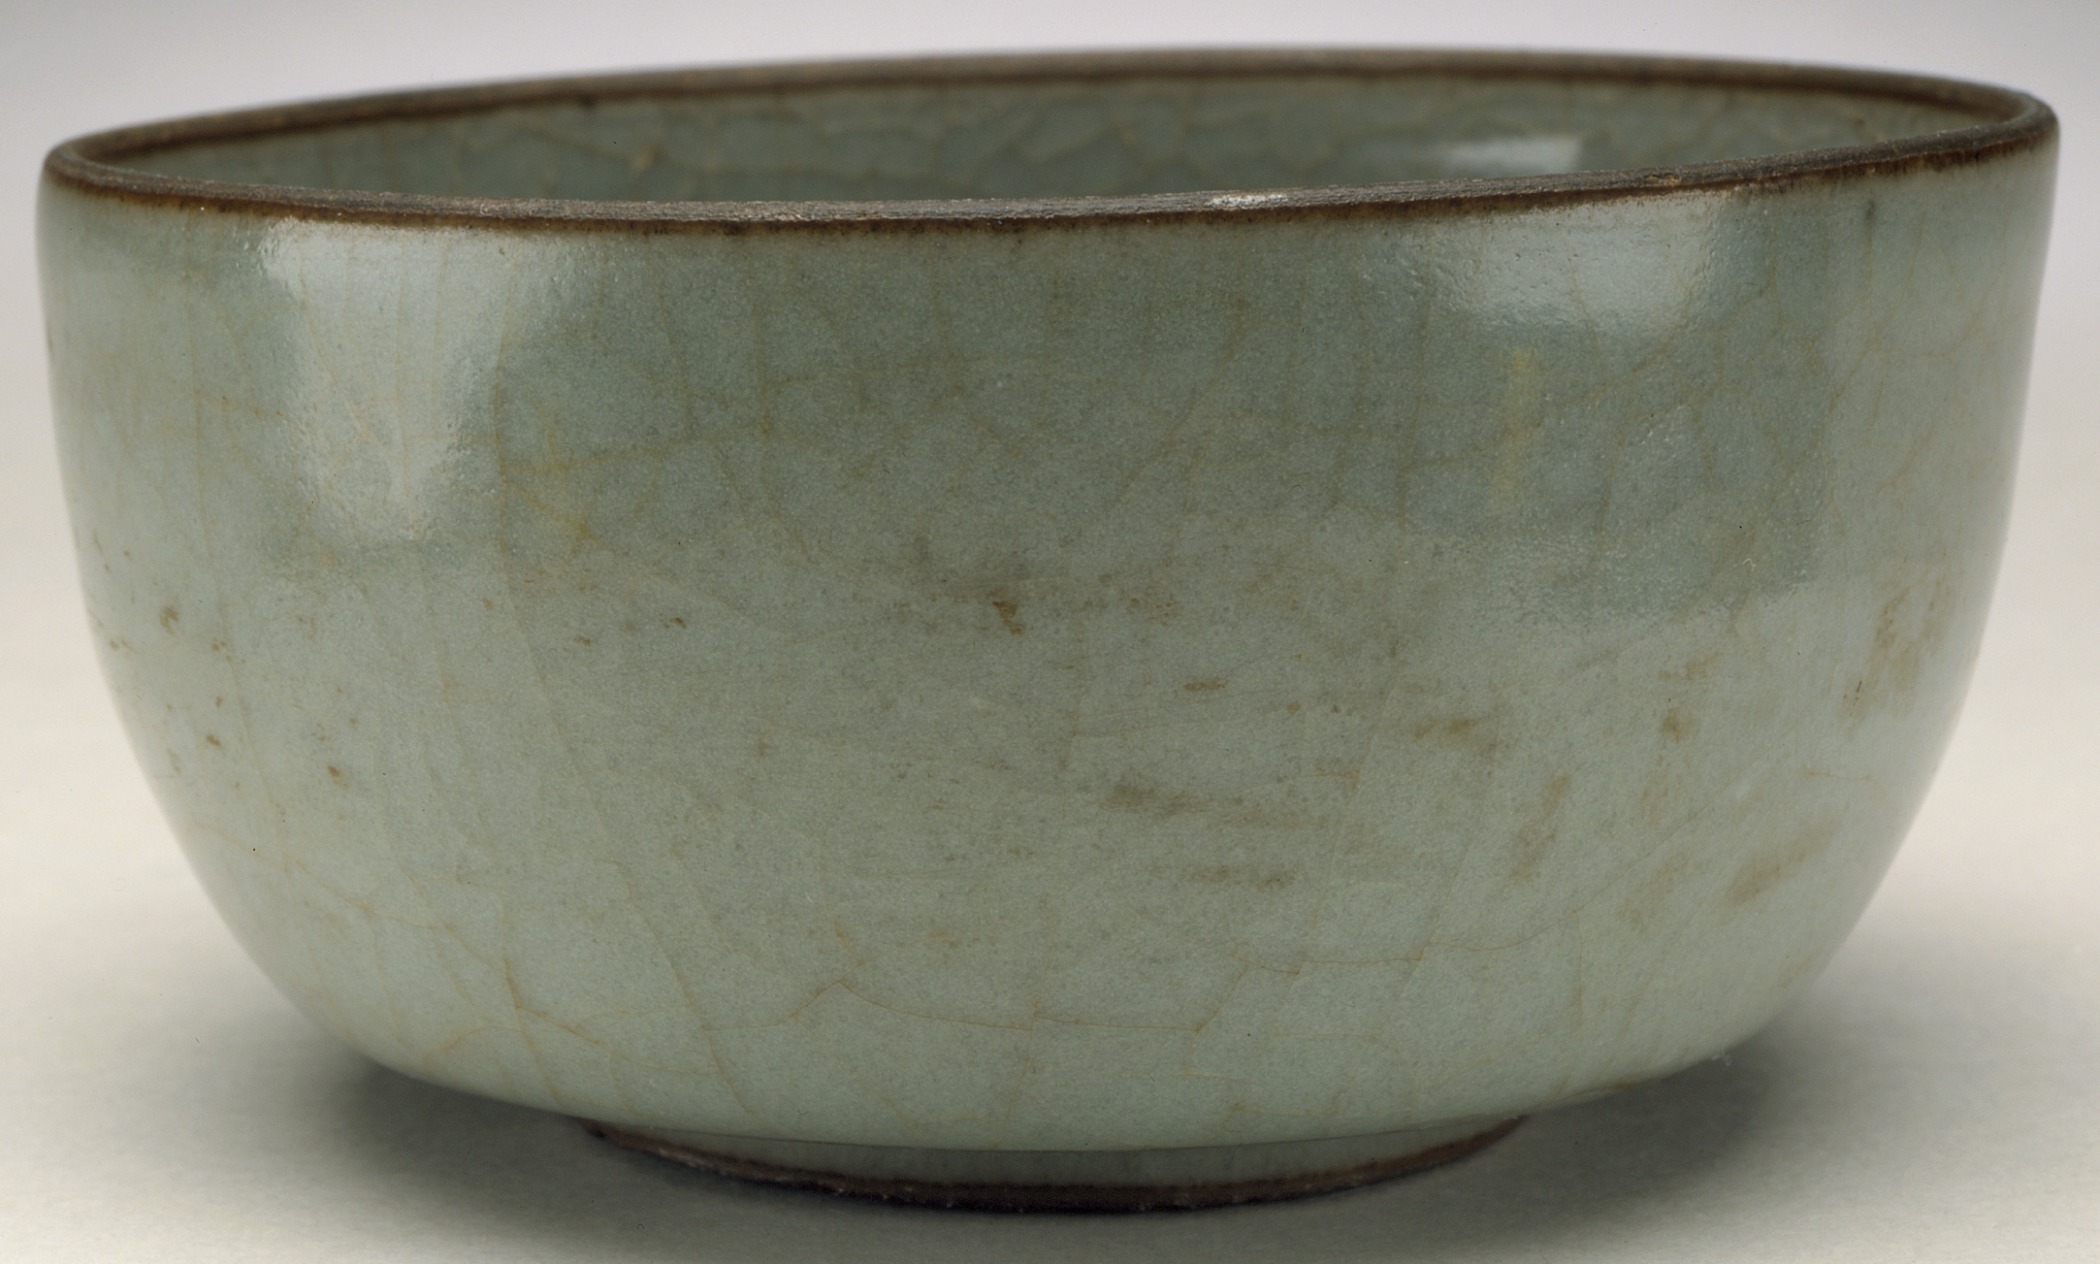 a small blue bowl sits empty on a table